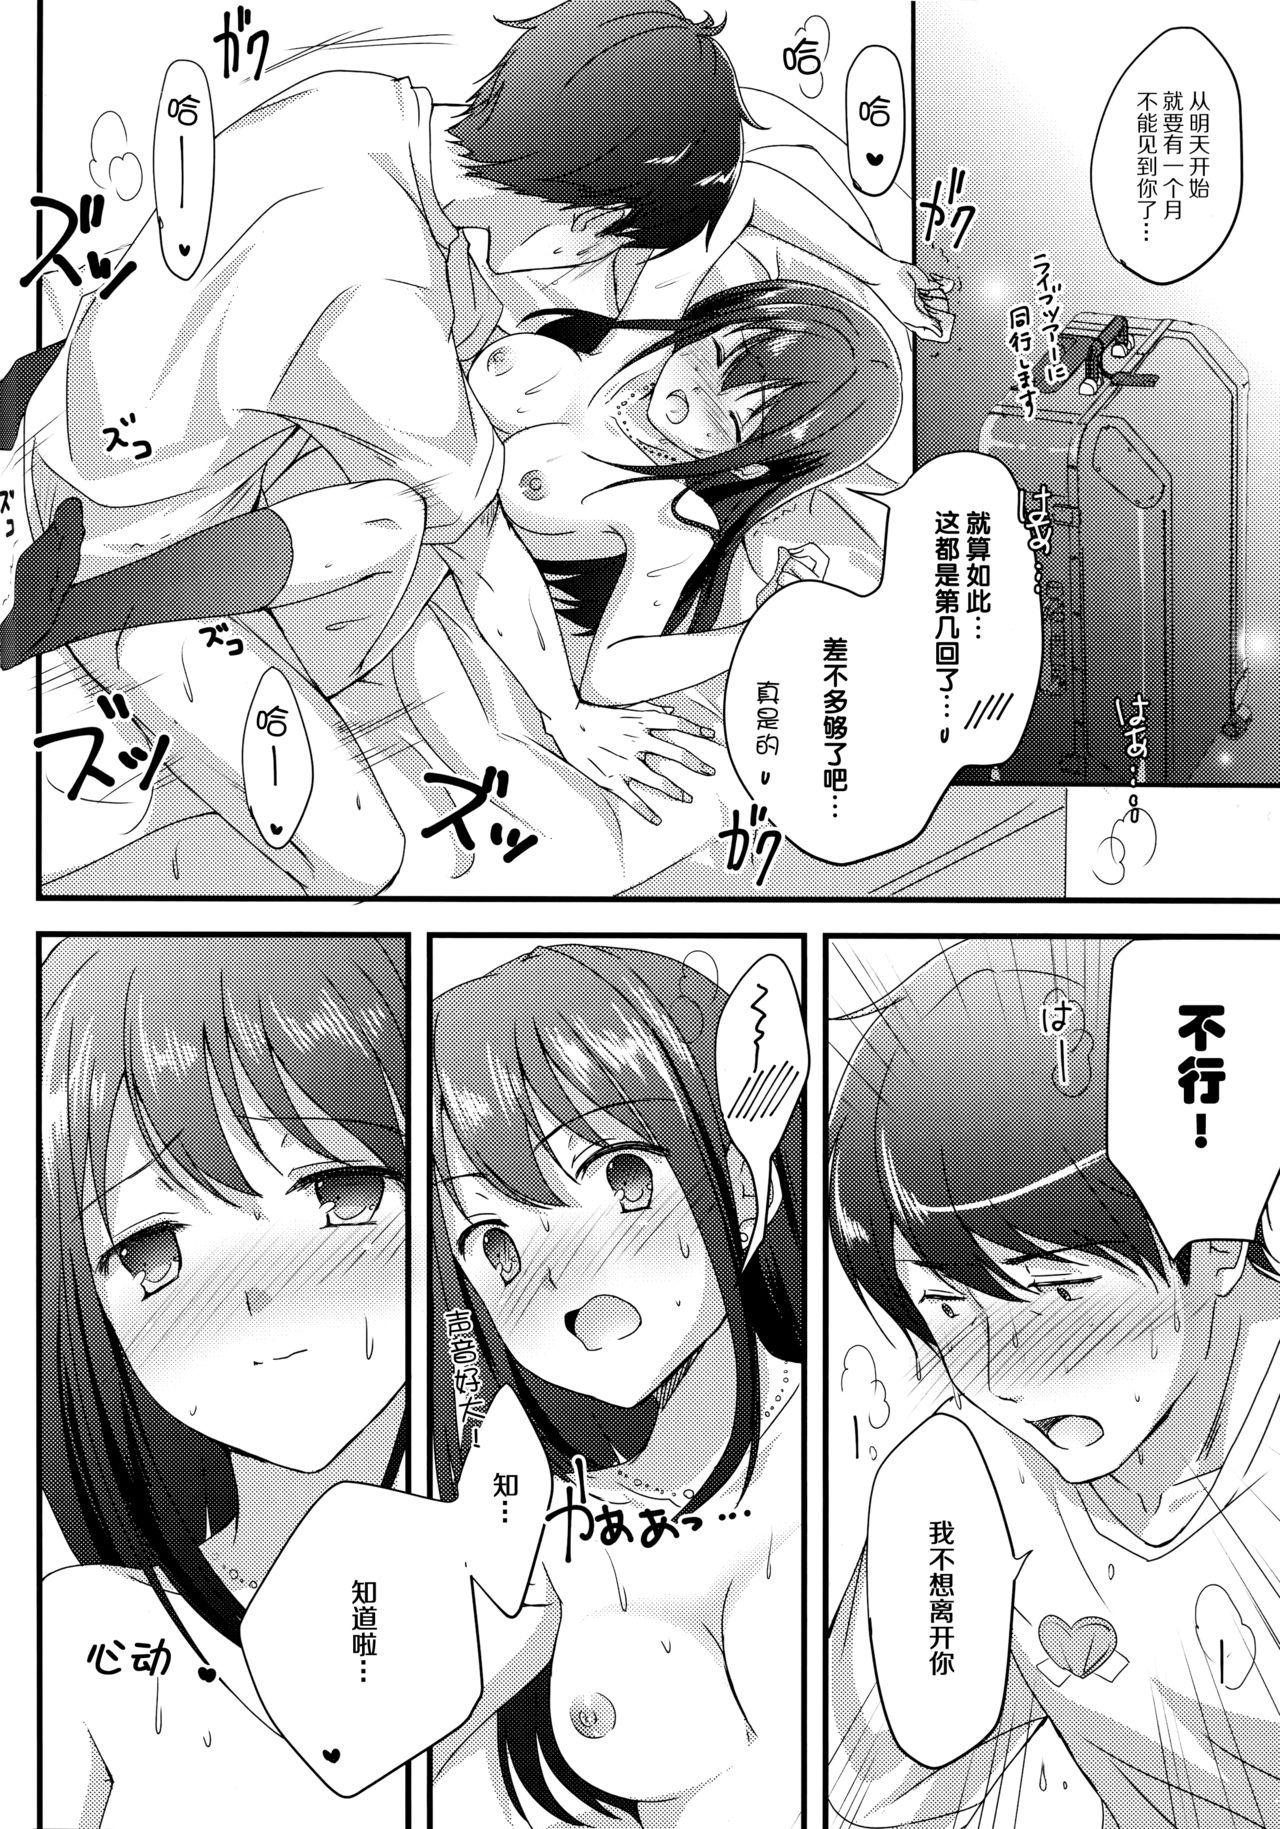 Uncensored Miwaku no Love Situation - The idolmaster Hottie - Page 4